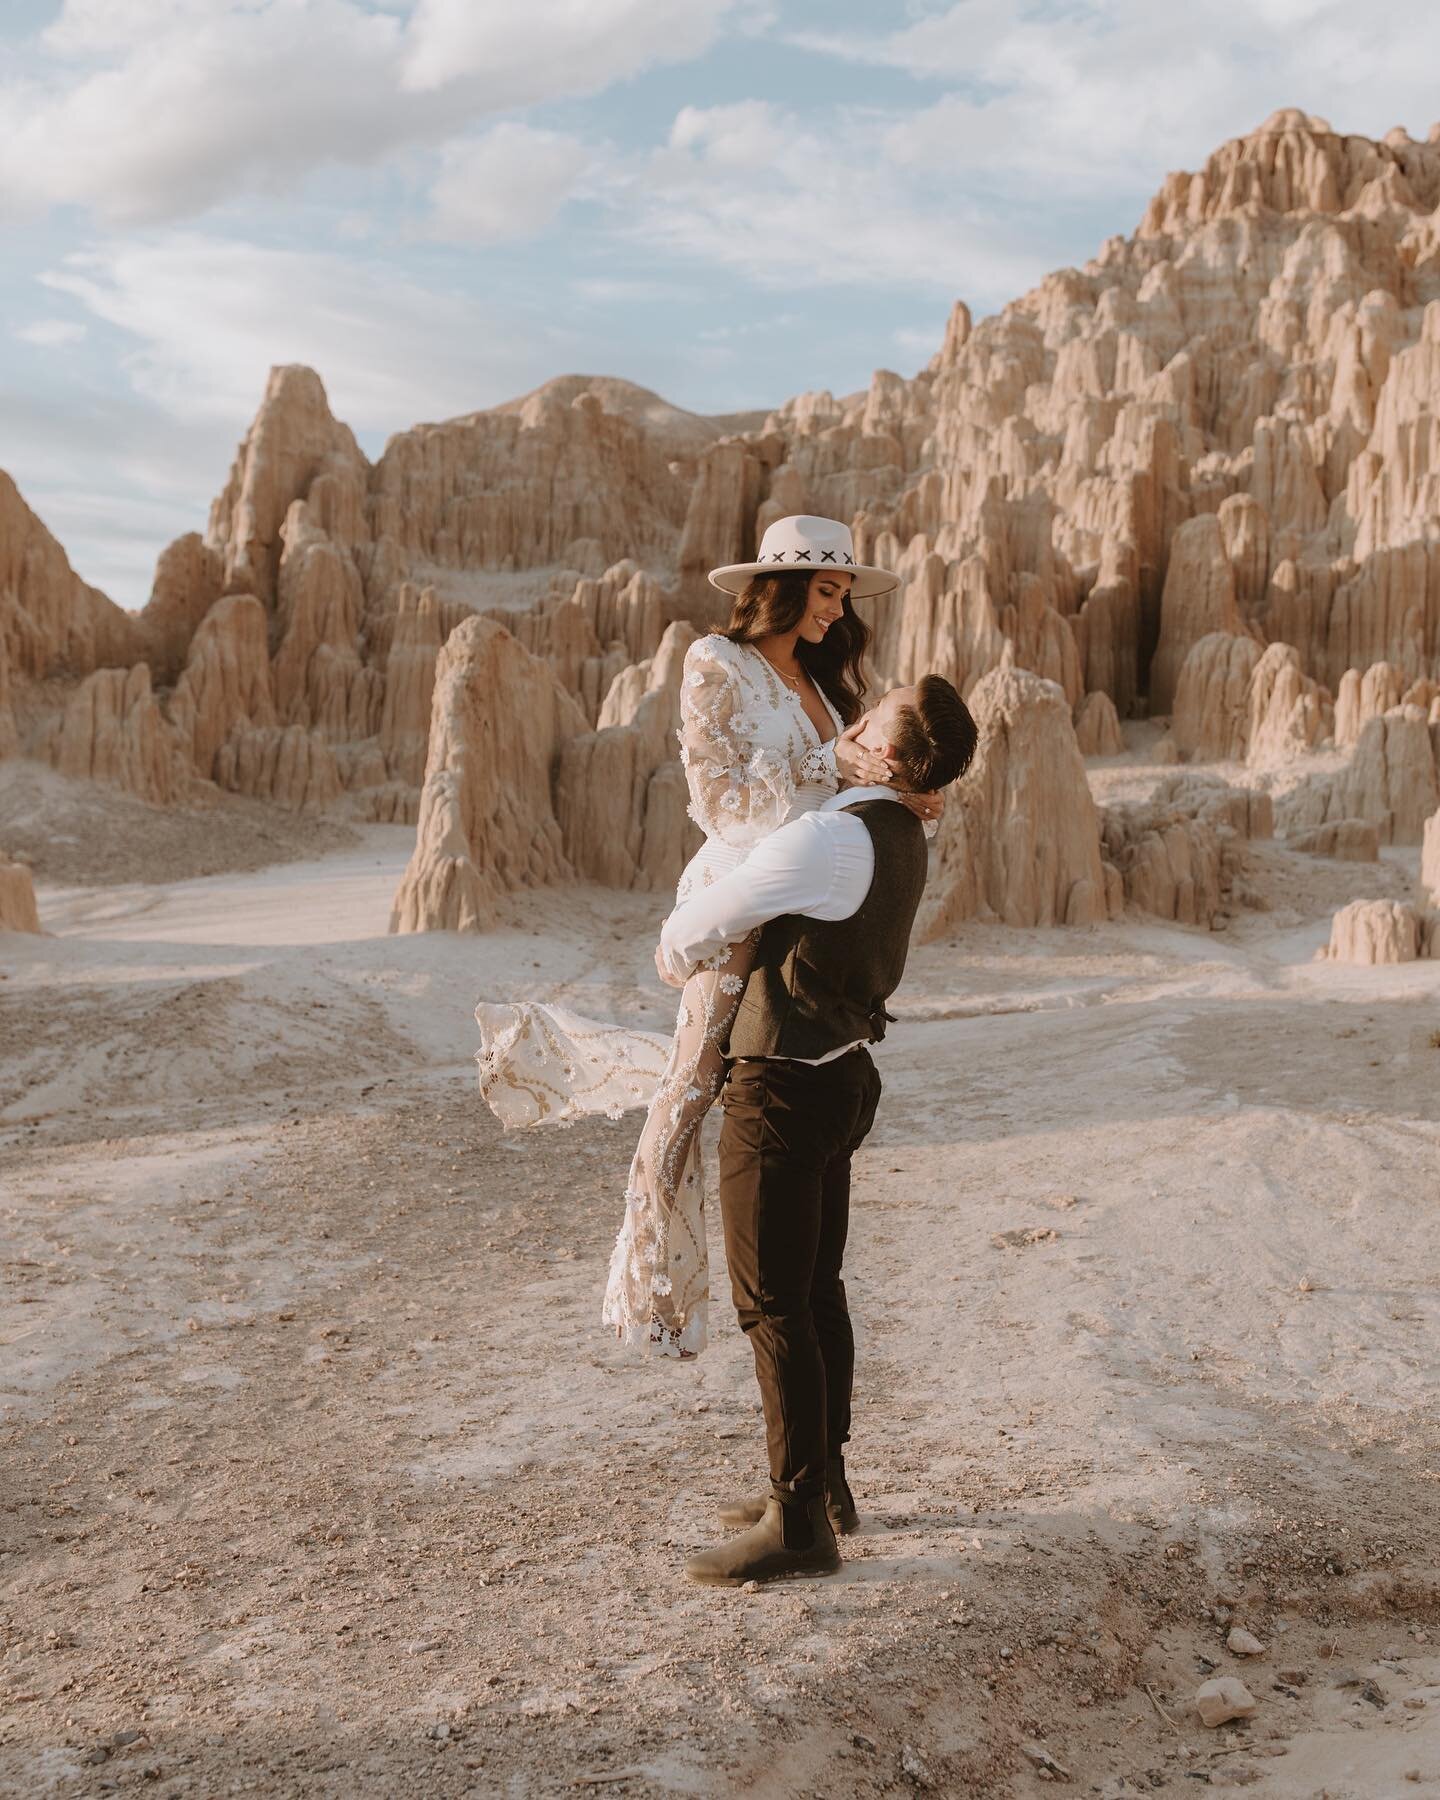 From dusty roads to breathtaking views, the journey to this hidden gem in Nevada was worth every mile to capture the love and beauty of this amazing couple.